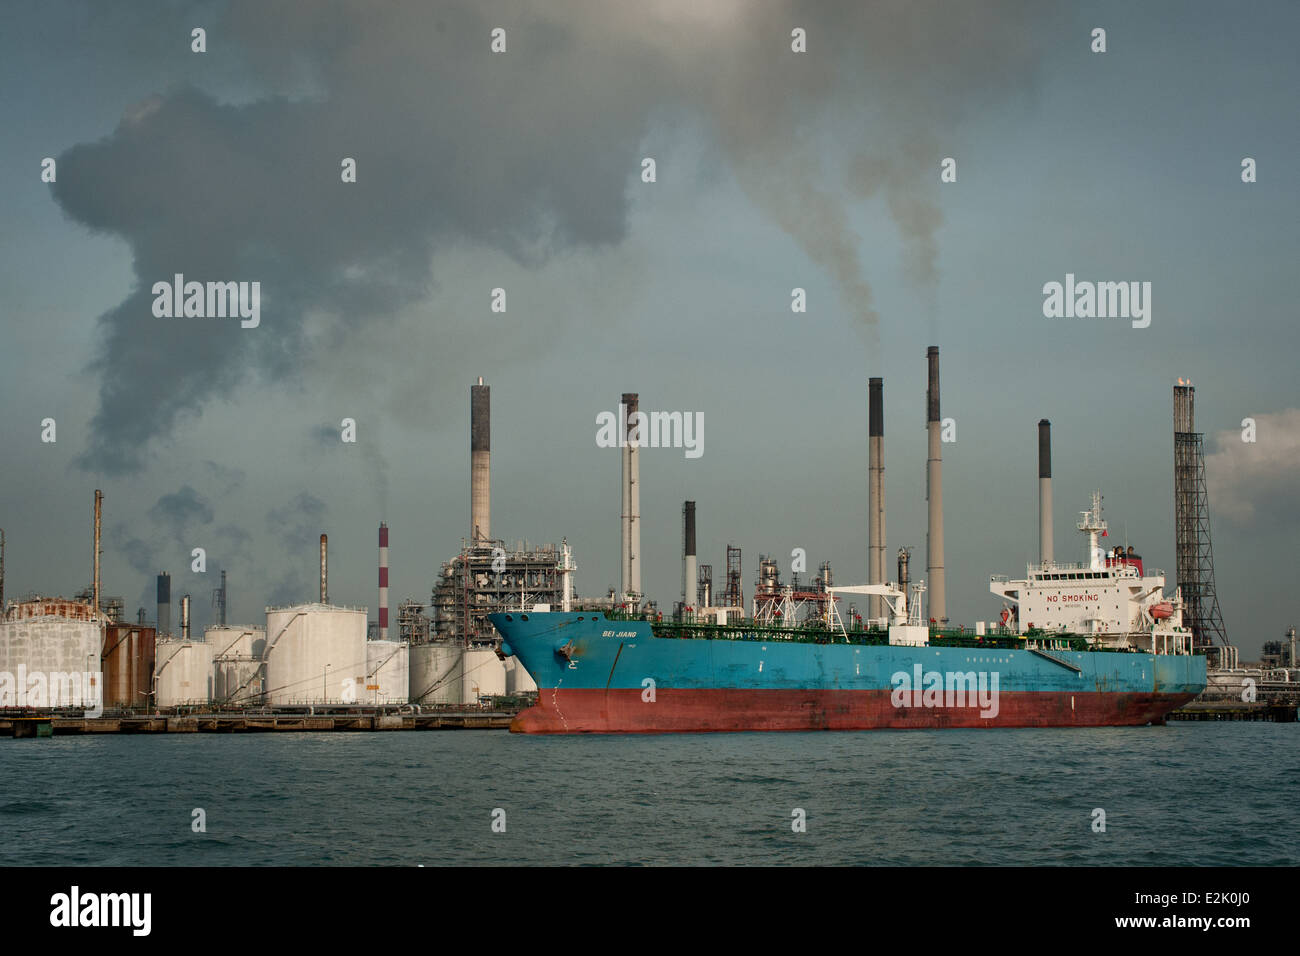 Tanker ready for loading in front of a refinery in Singapore Stock Photo